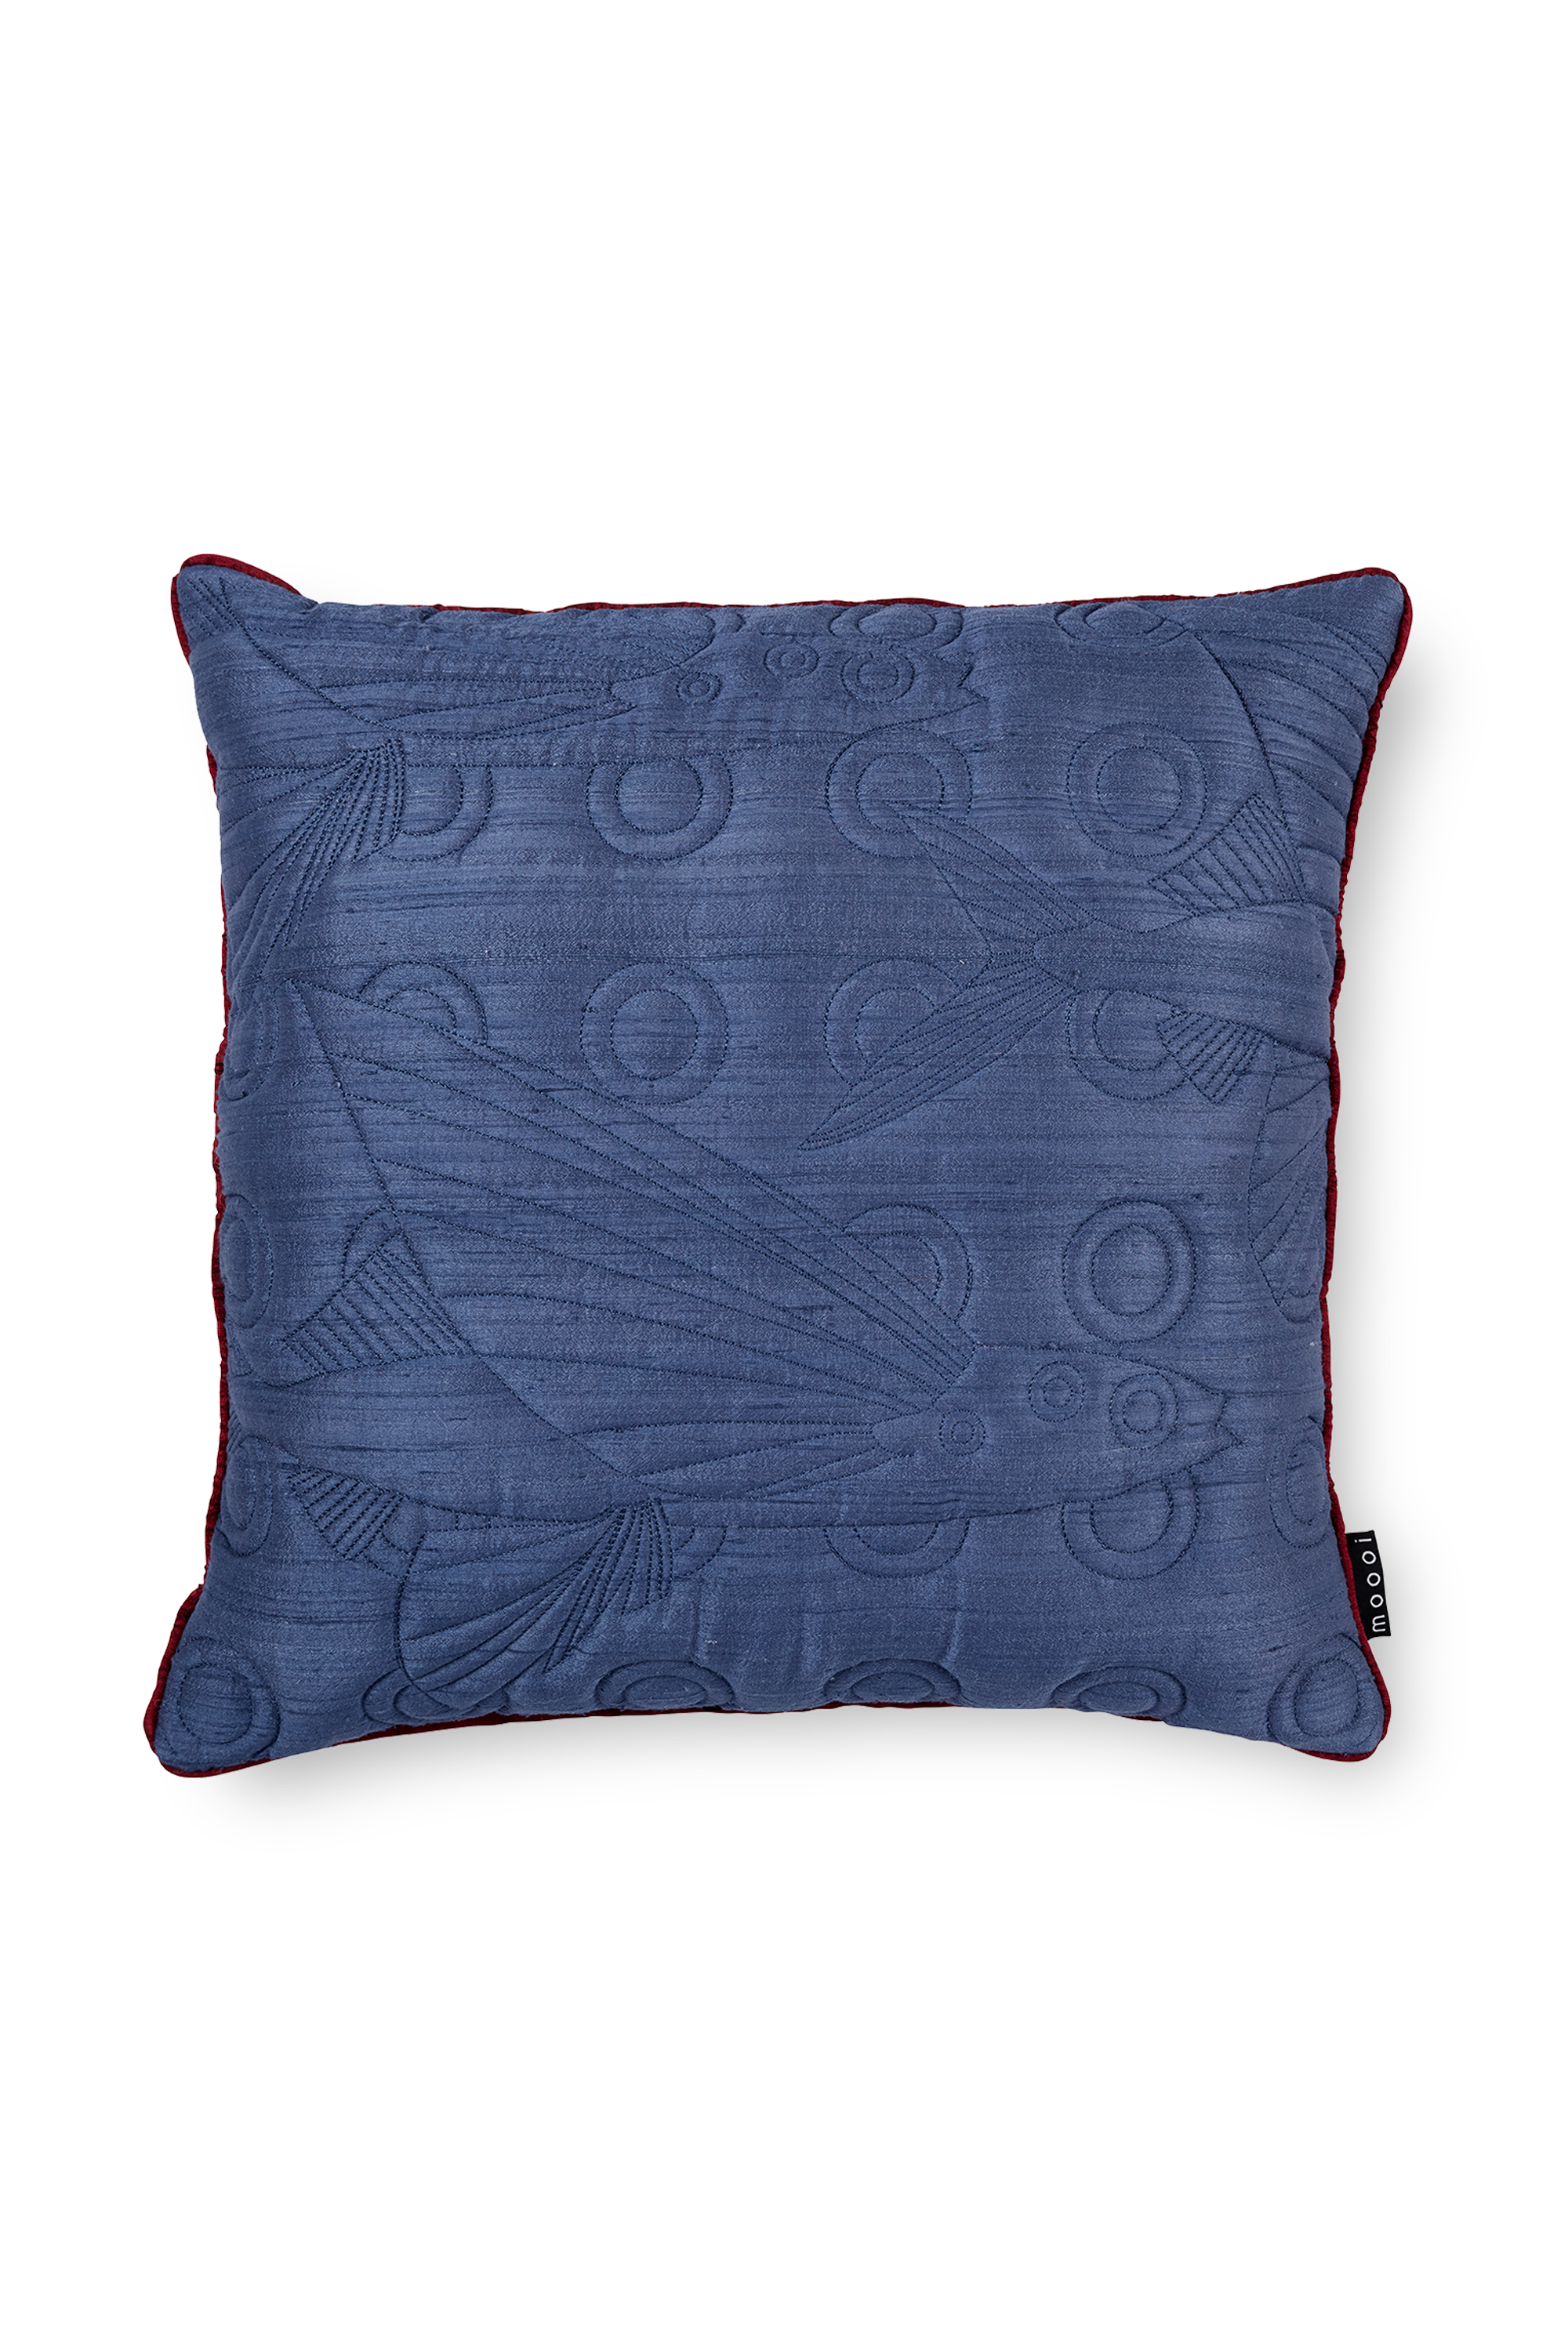 Flying Coral Fish Decorative Pillow - Moooi